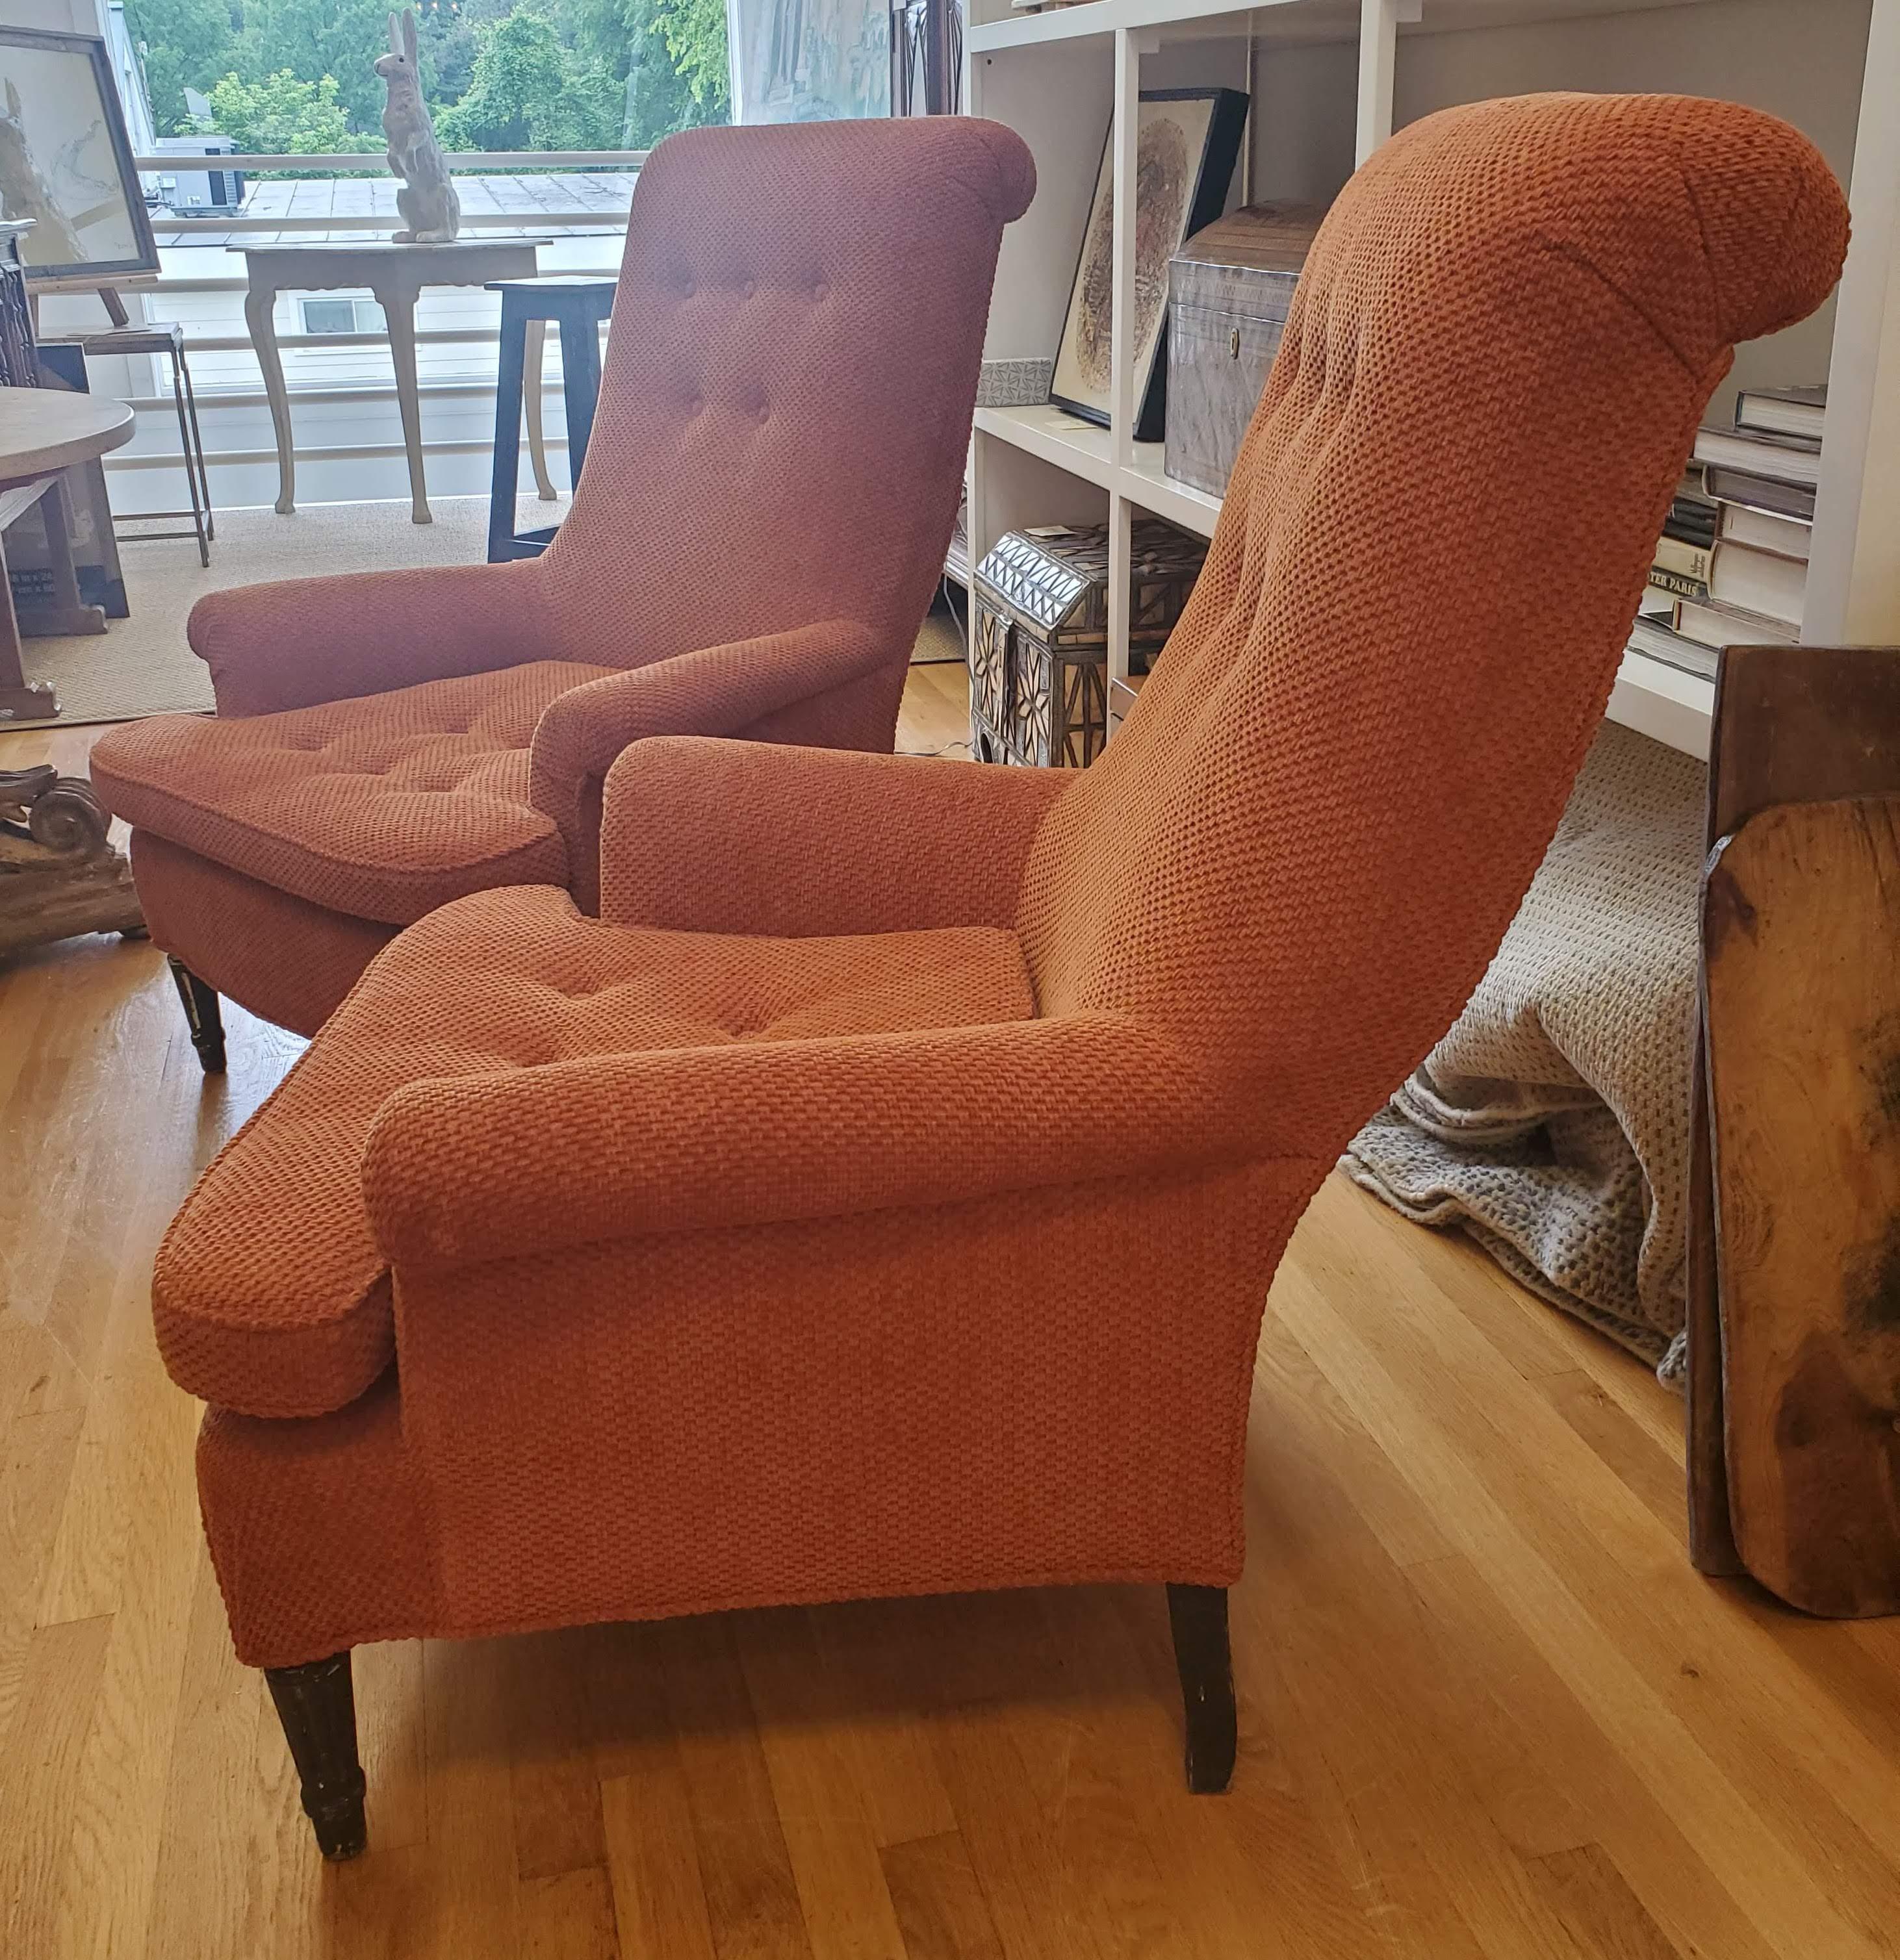 This pair of 19th century English club chairs will make a lovely sturdy and structural addition to your sitting room. With rolled arms and back and button decoration, these chairs, upholstered in an orange chenille fabric, are fun and sophisticated.